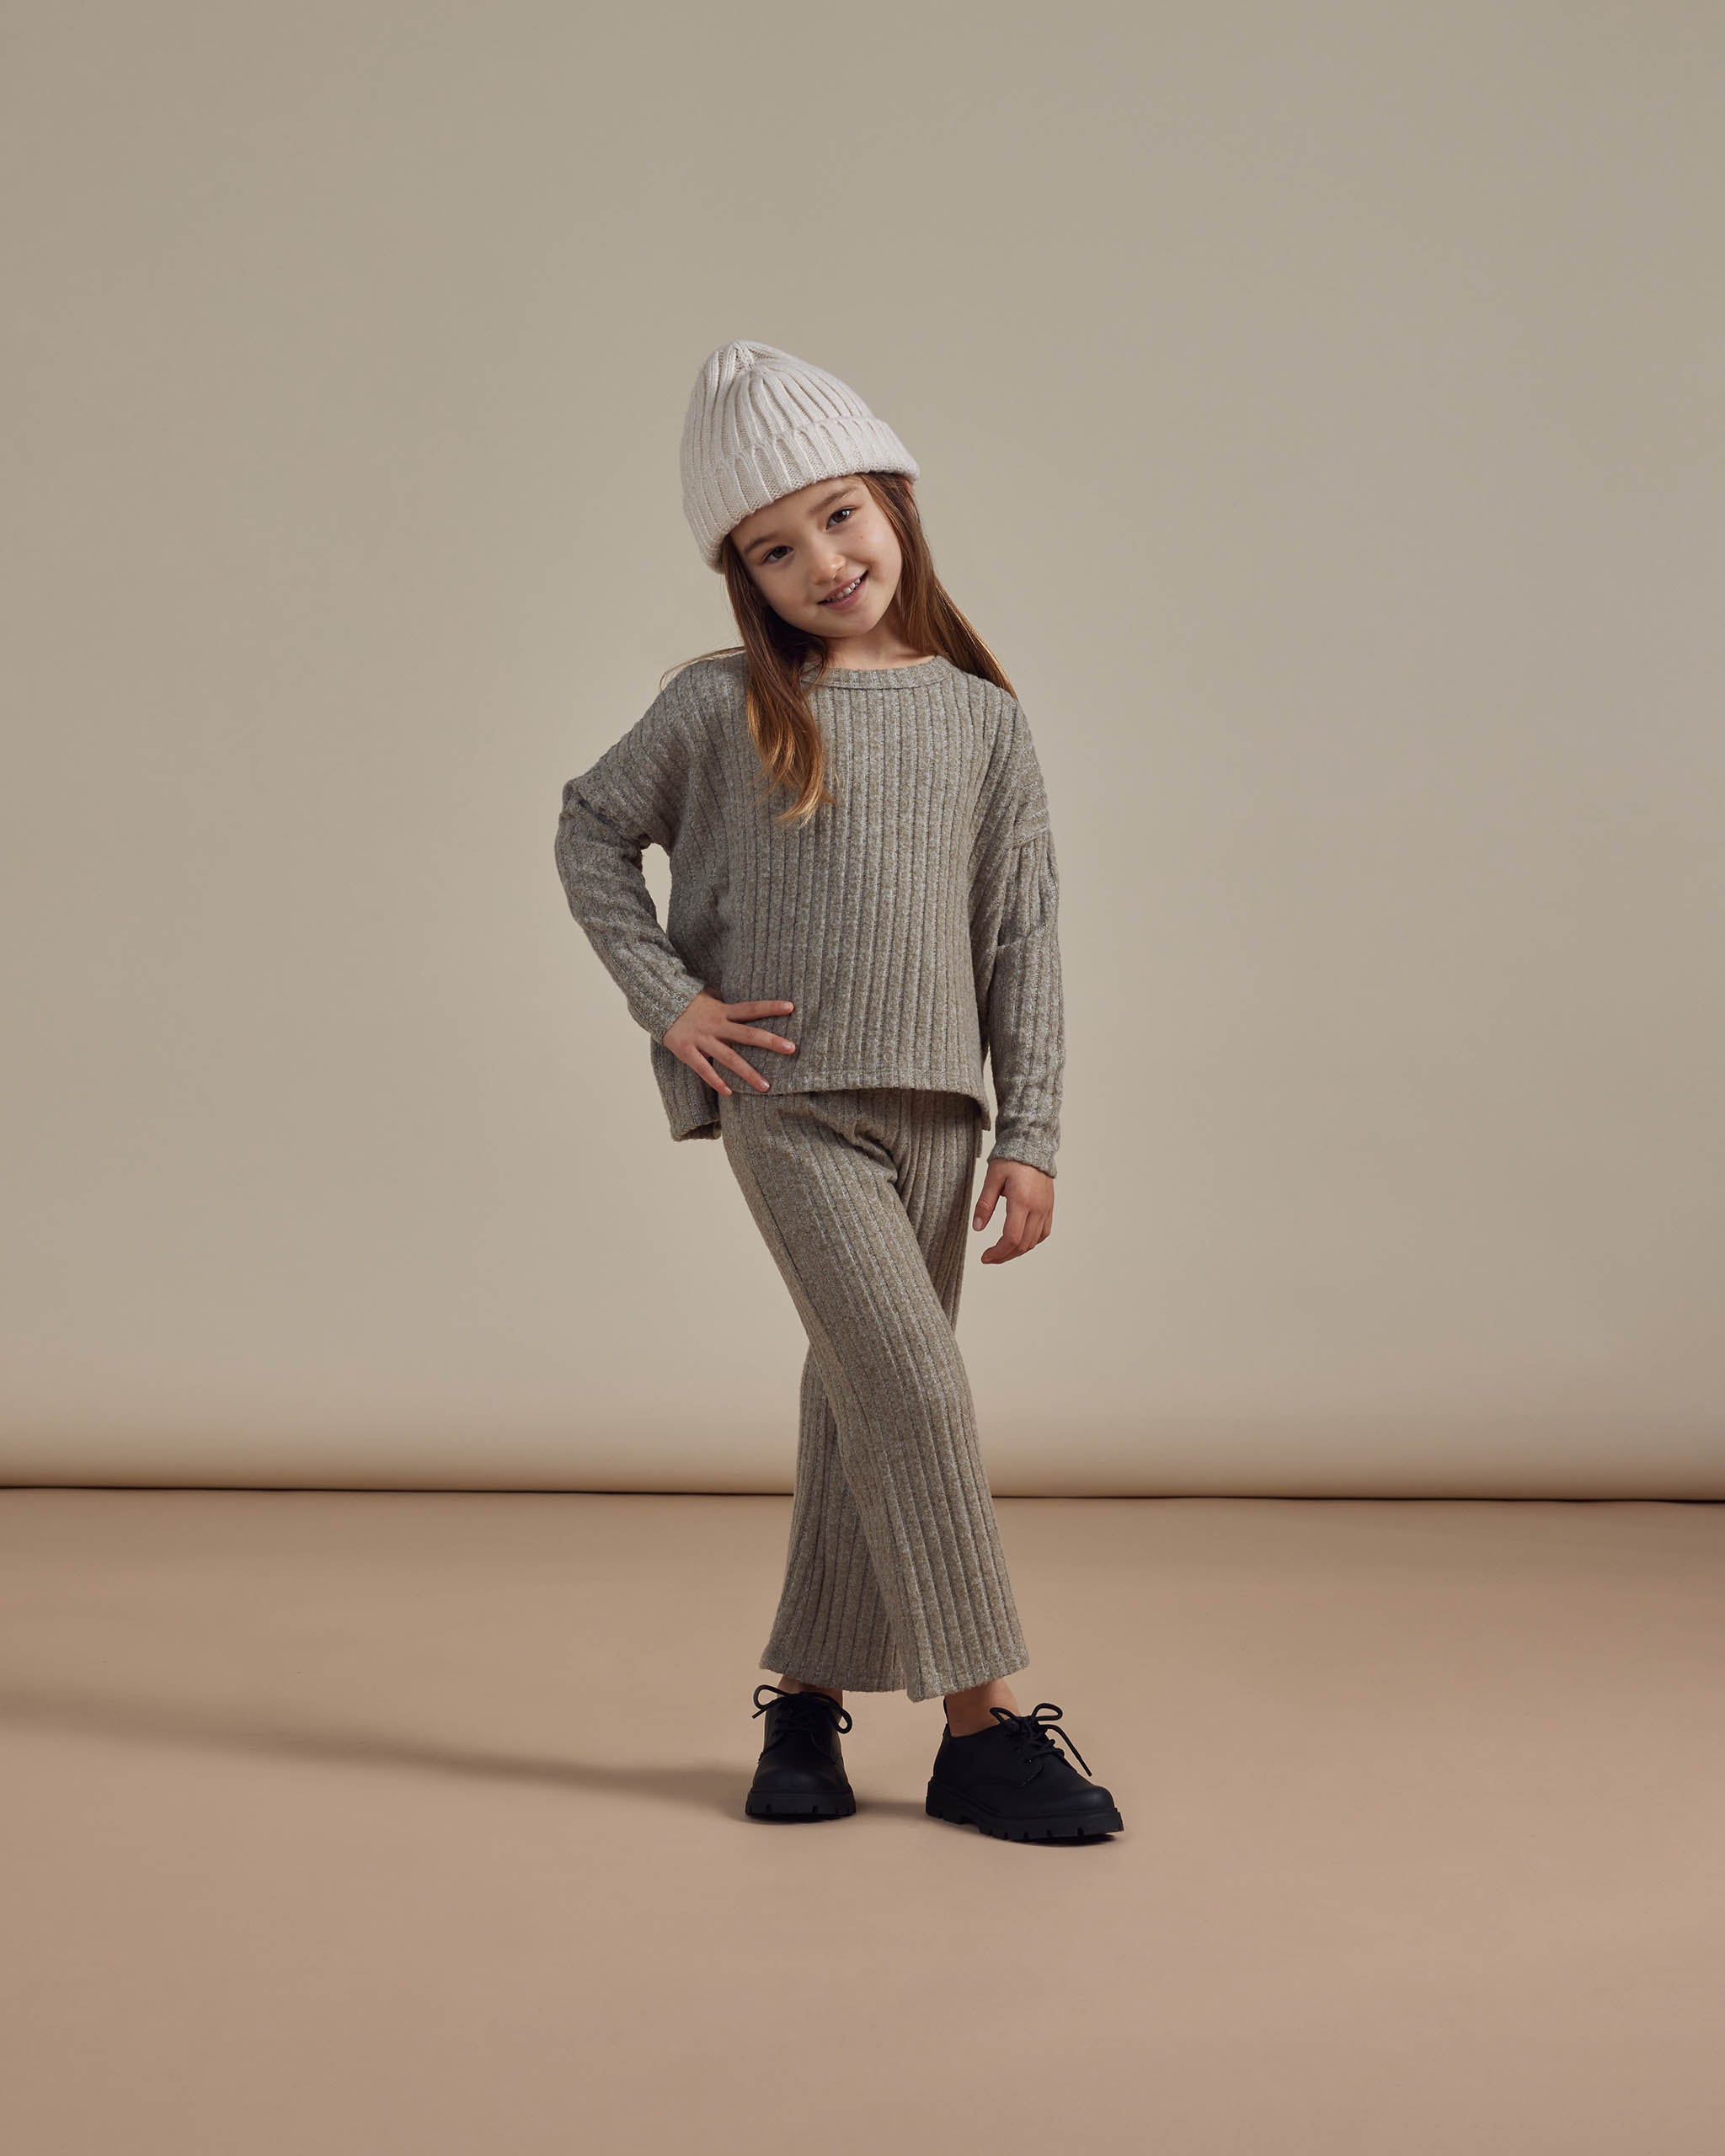 Cozy Rib Knit Set || Heathered Fern - Rylee + Cru | Kids Clothes | Trendy Baby Clothes | Modern Infant Outfits |